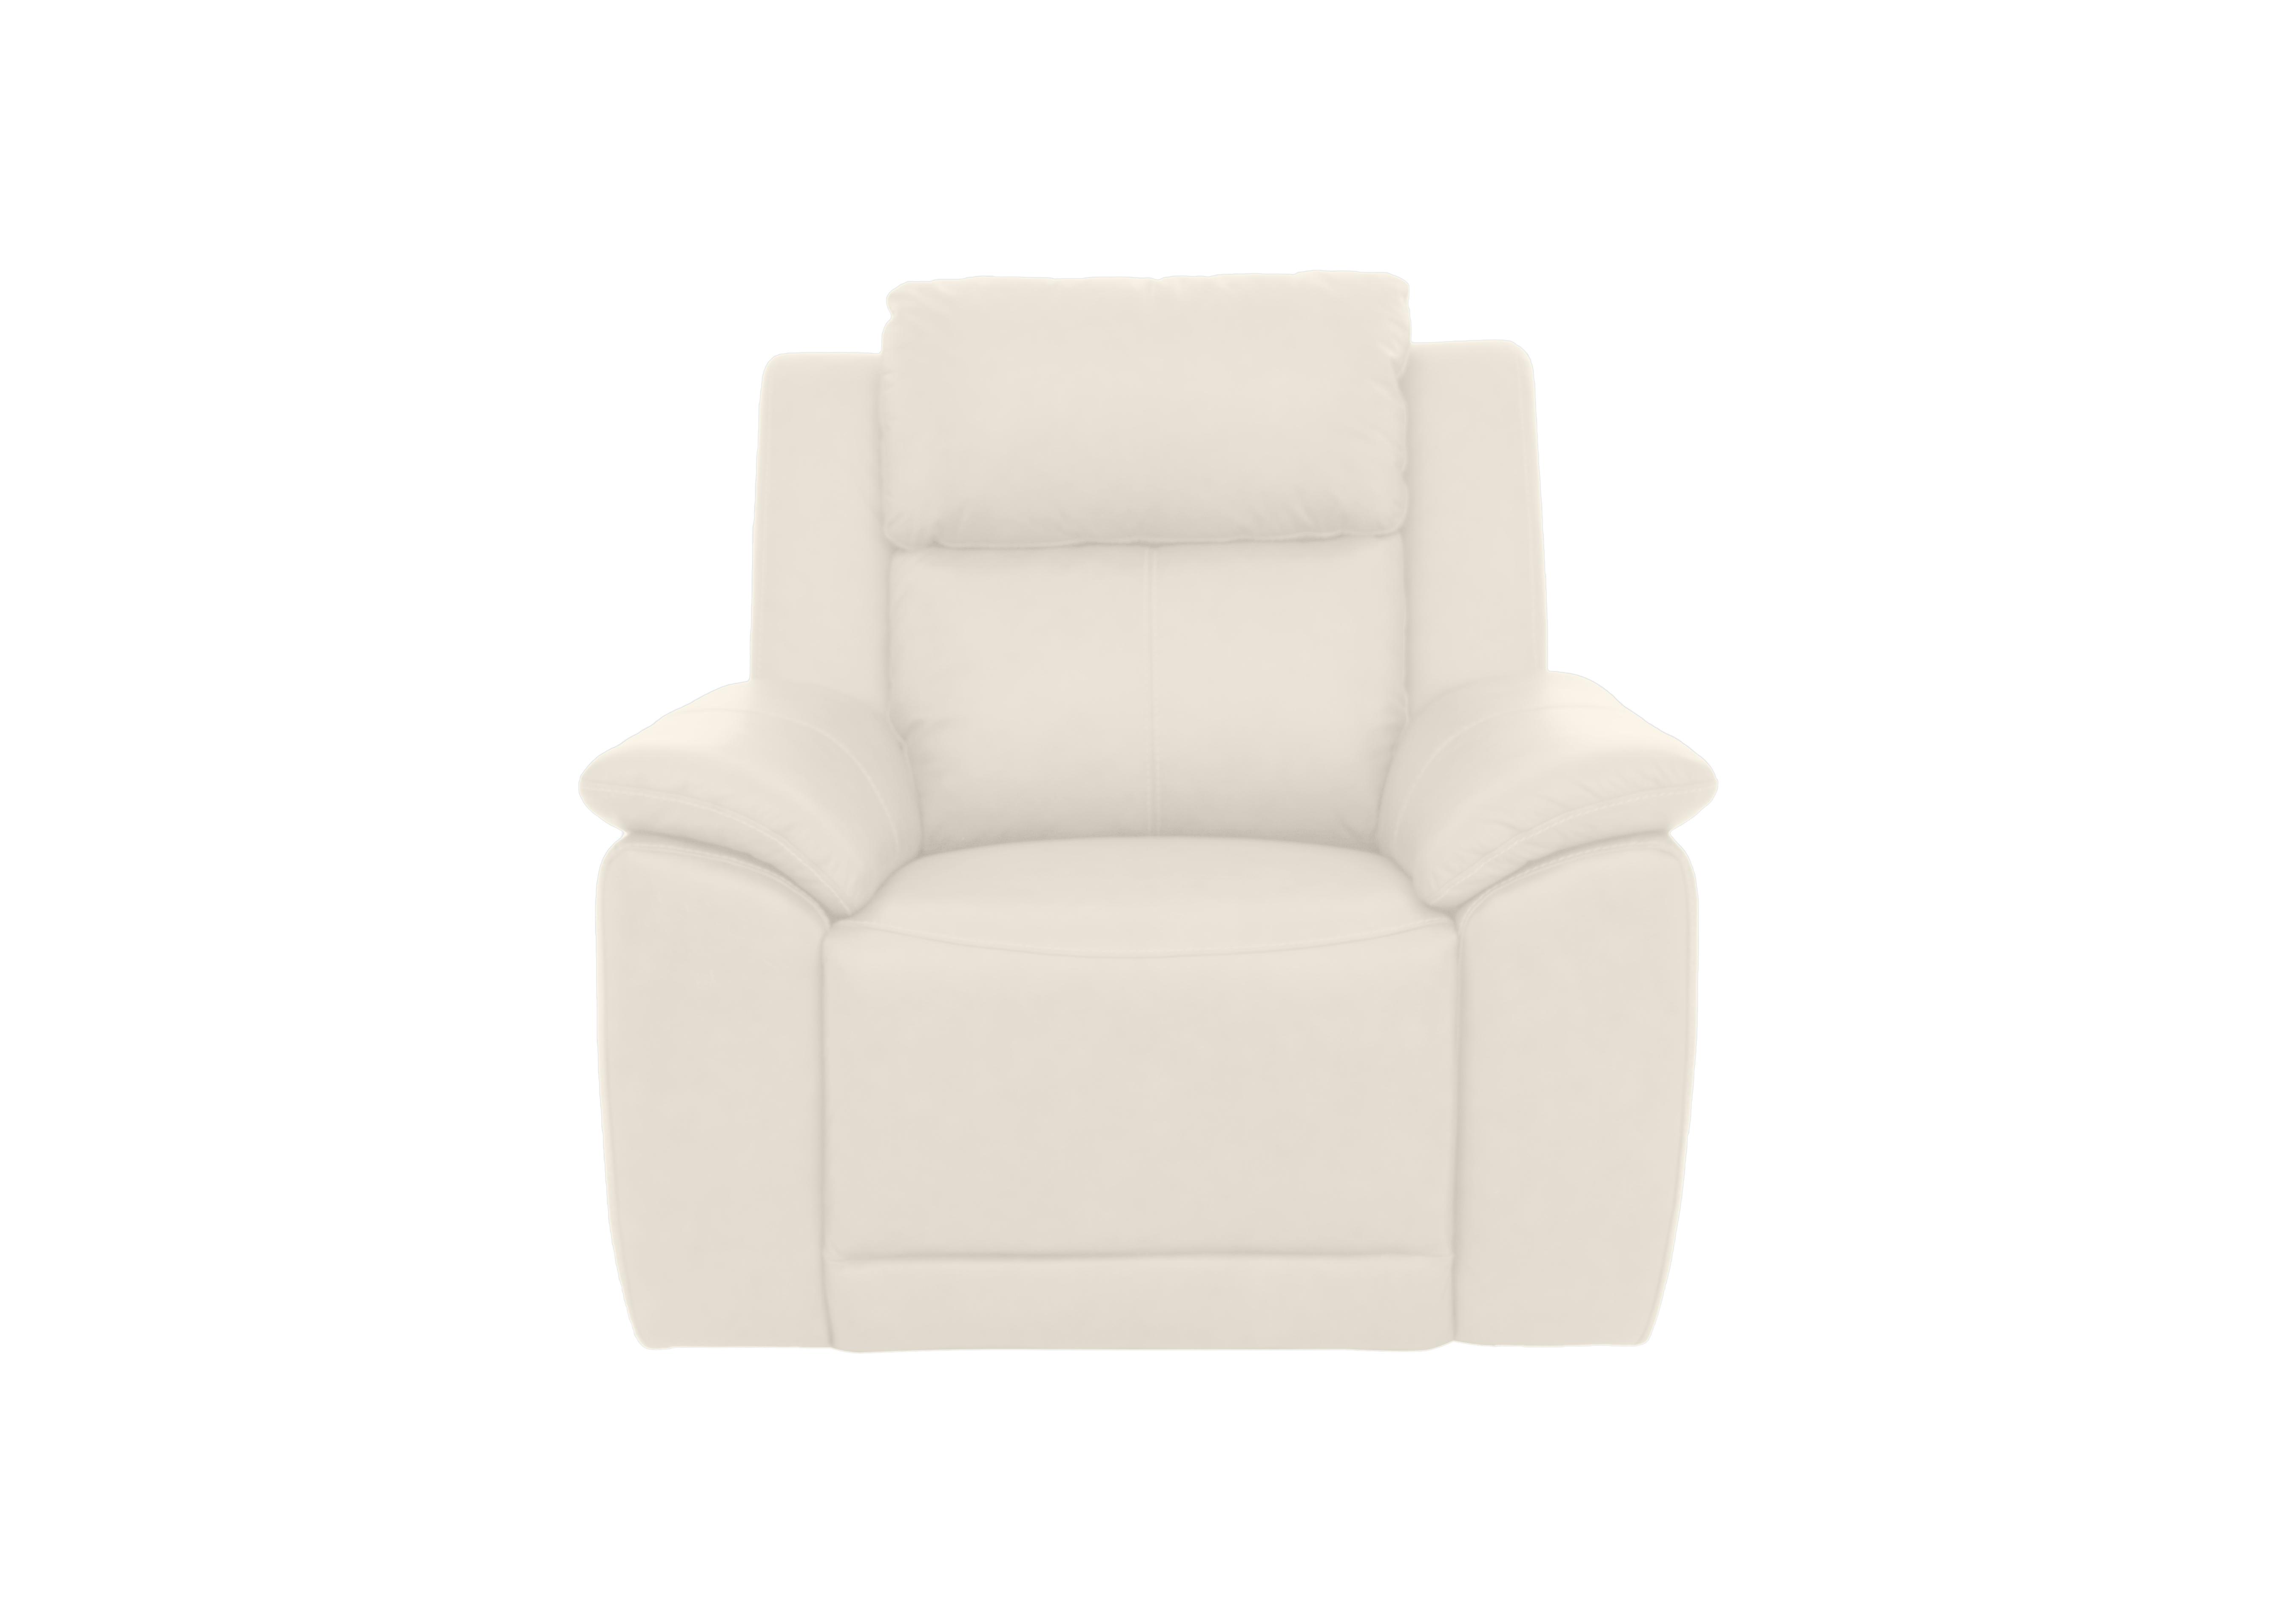 Utah Leather Power Recliner Chair with Power Headrest and Power Lumbar in White Le-9307 on Furniture Village